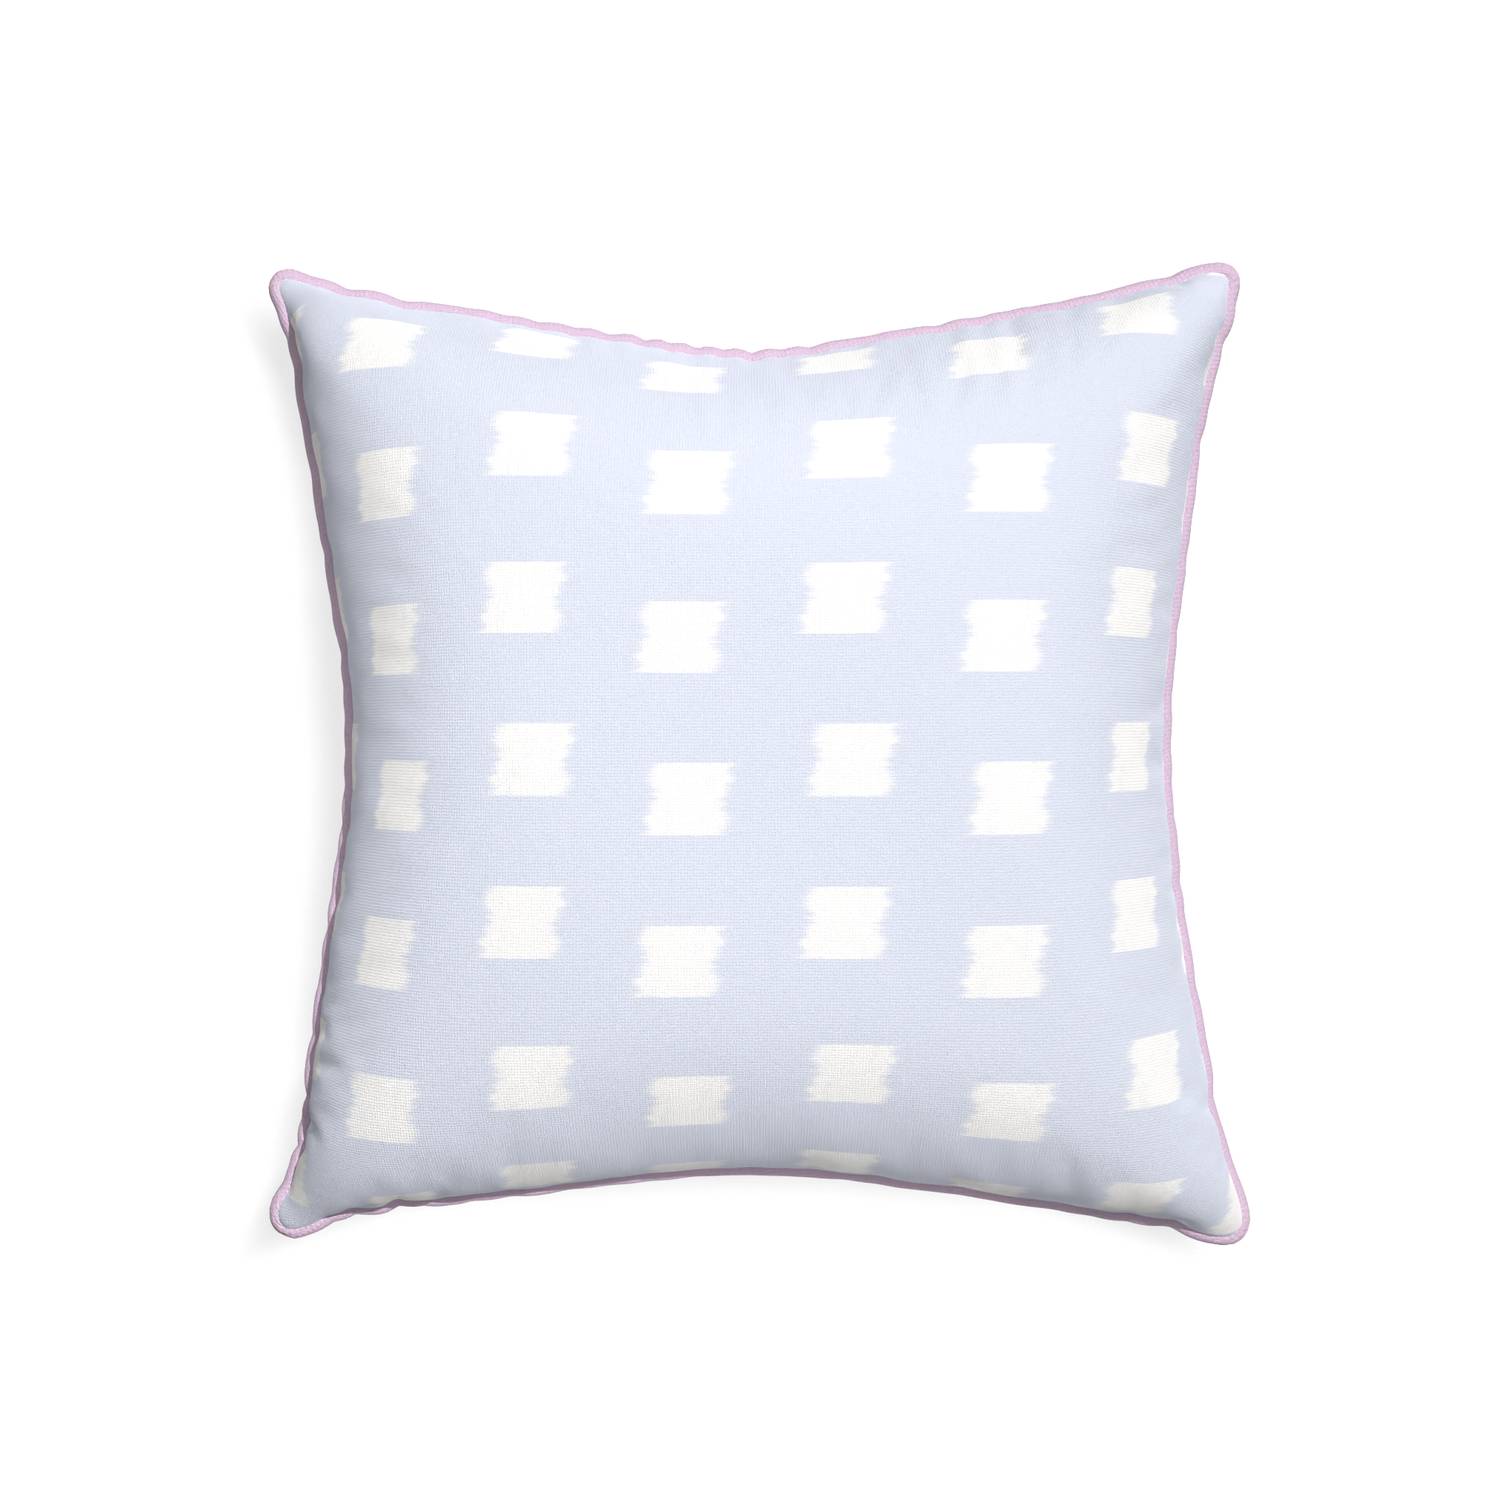 22-square denton custom pillow with l piping on white background